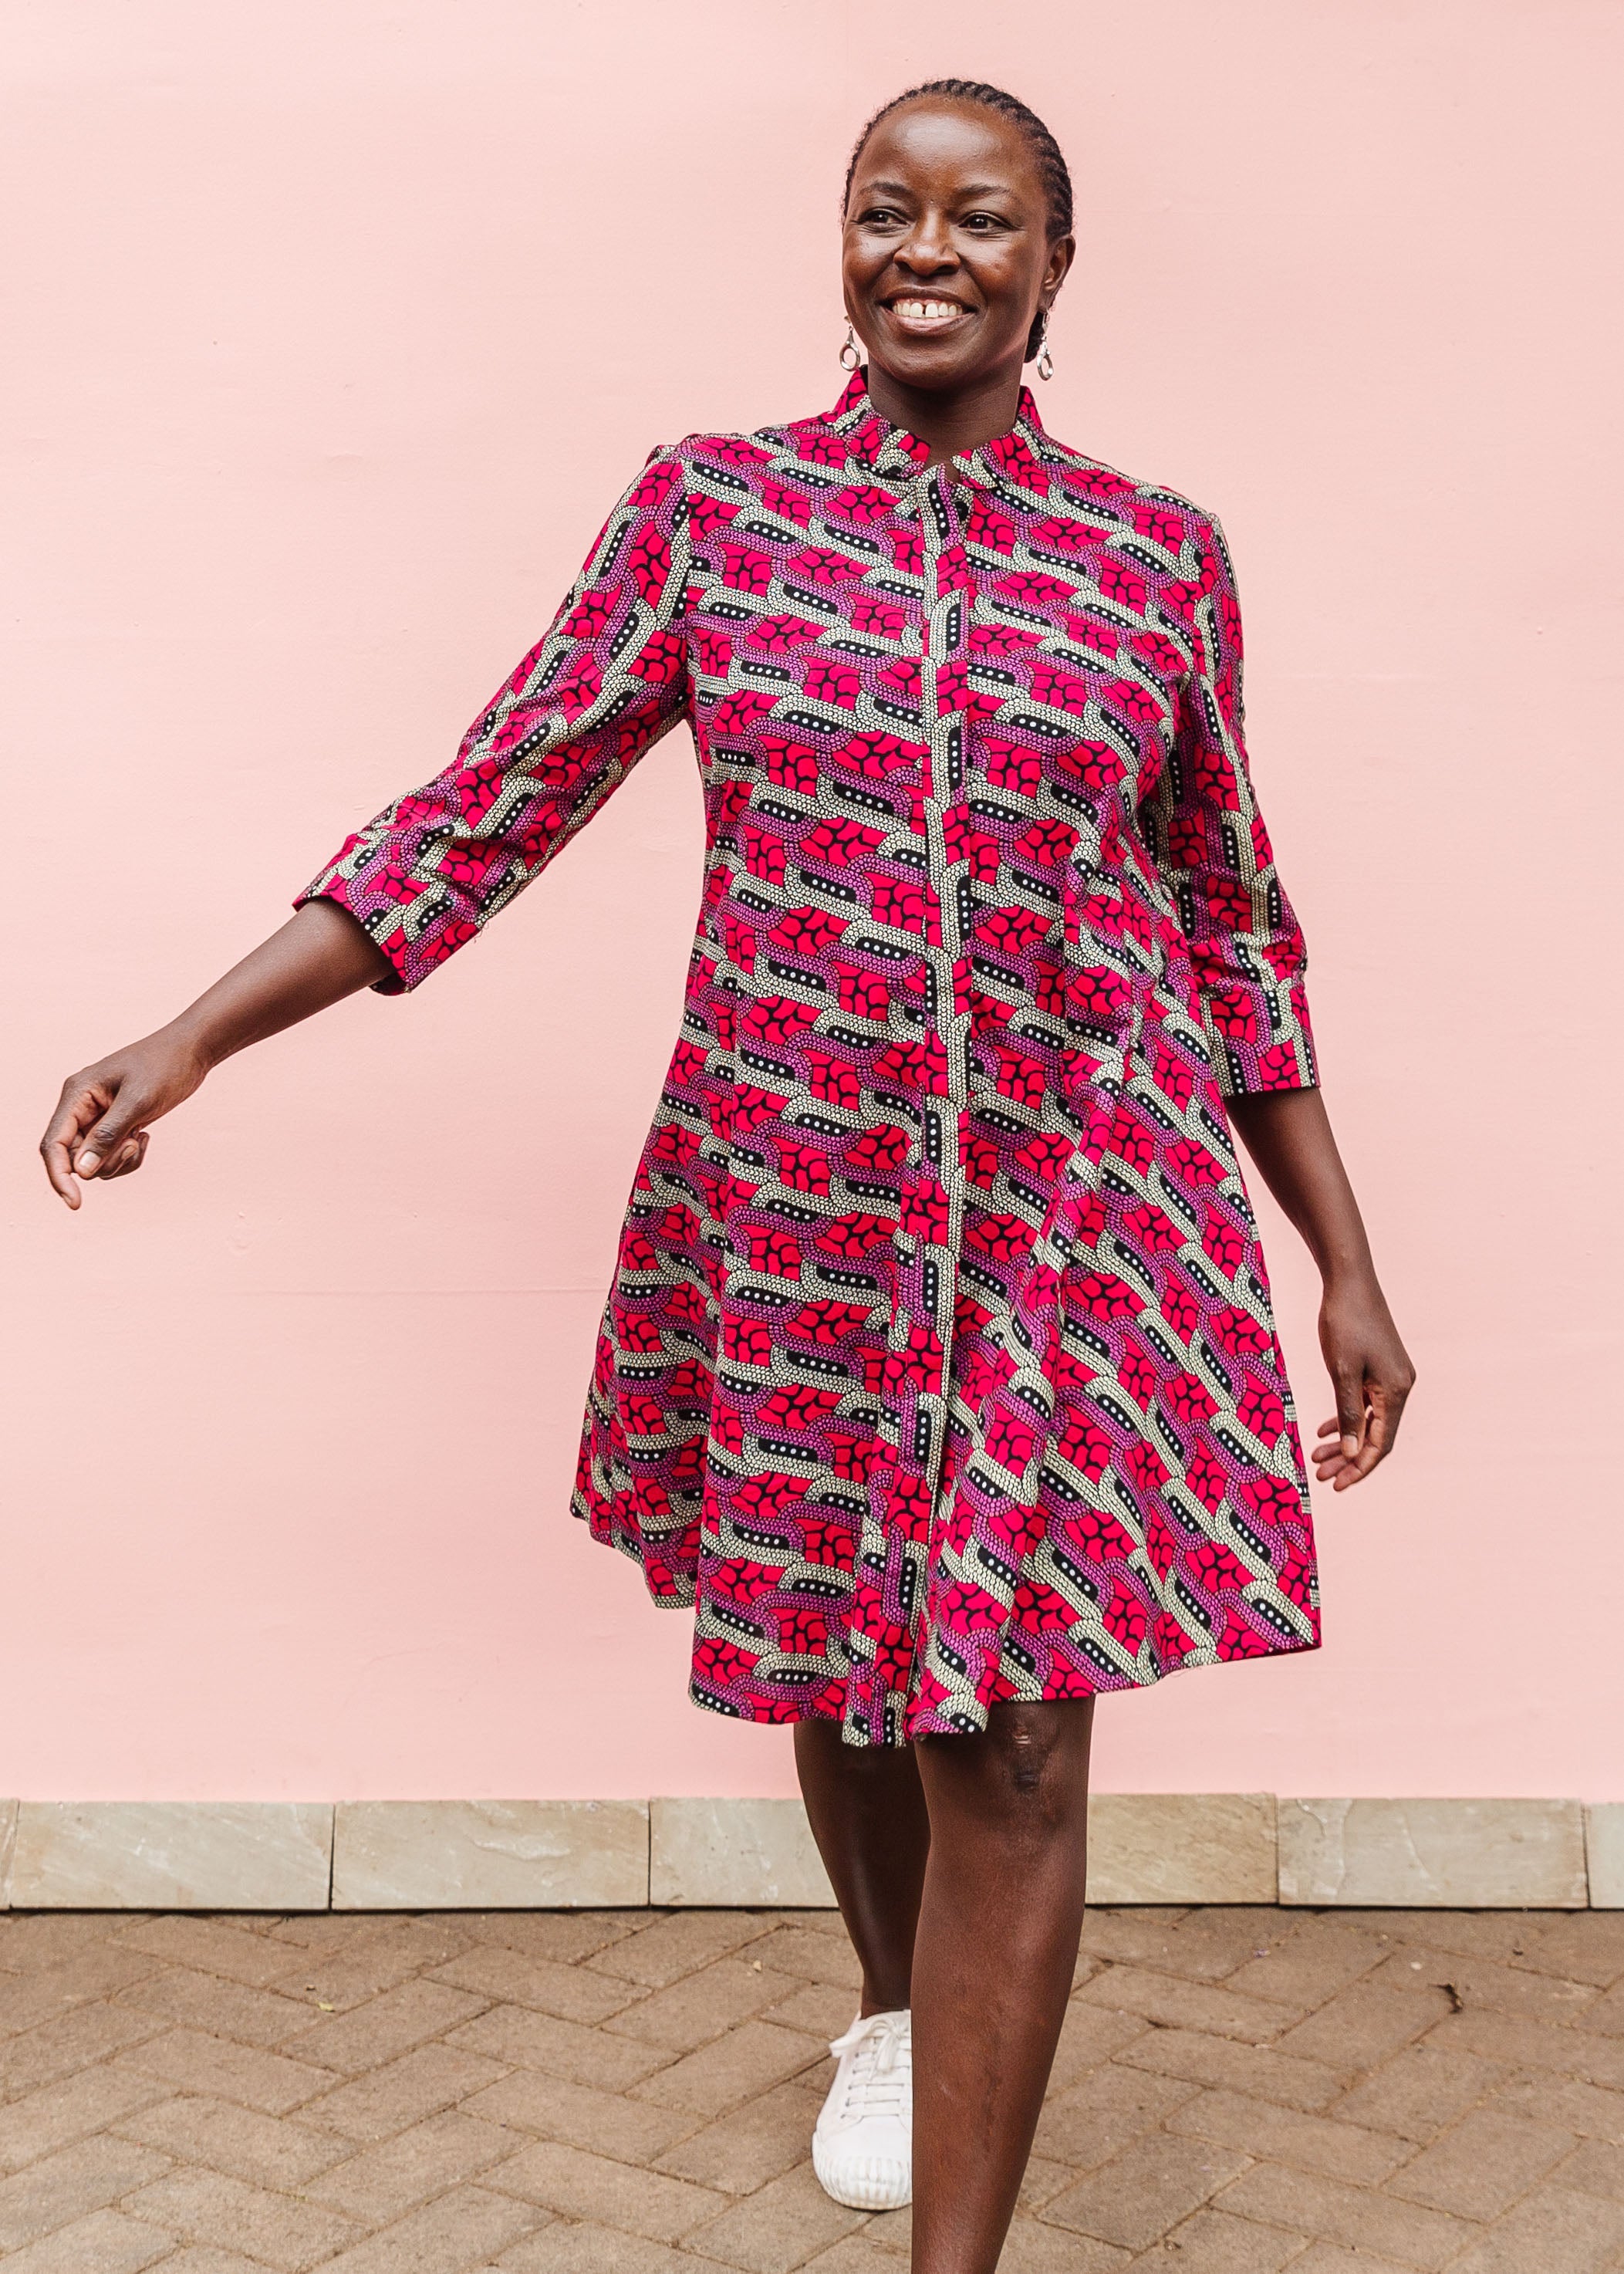 Model wearing red and pink geometric print dress.